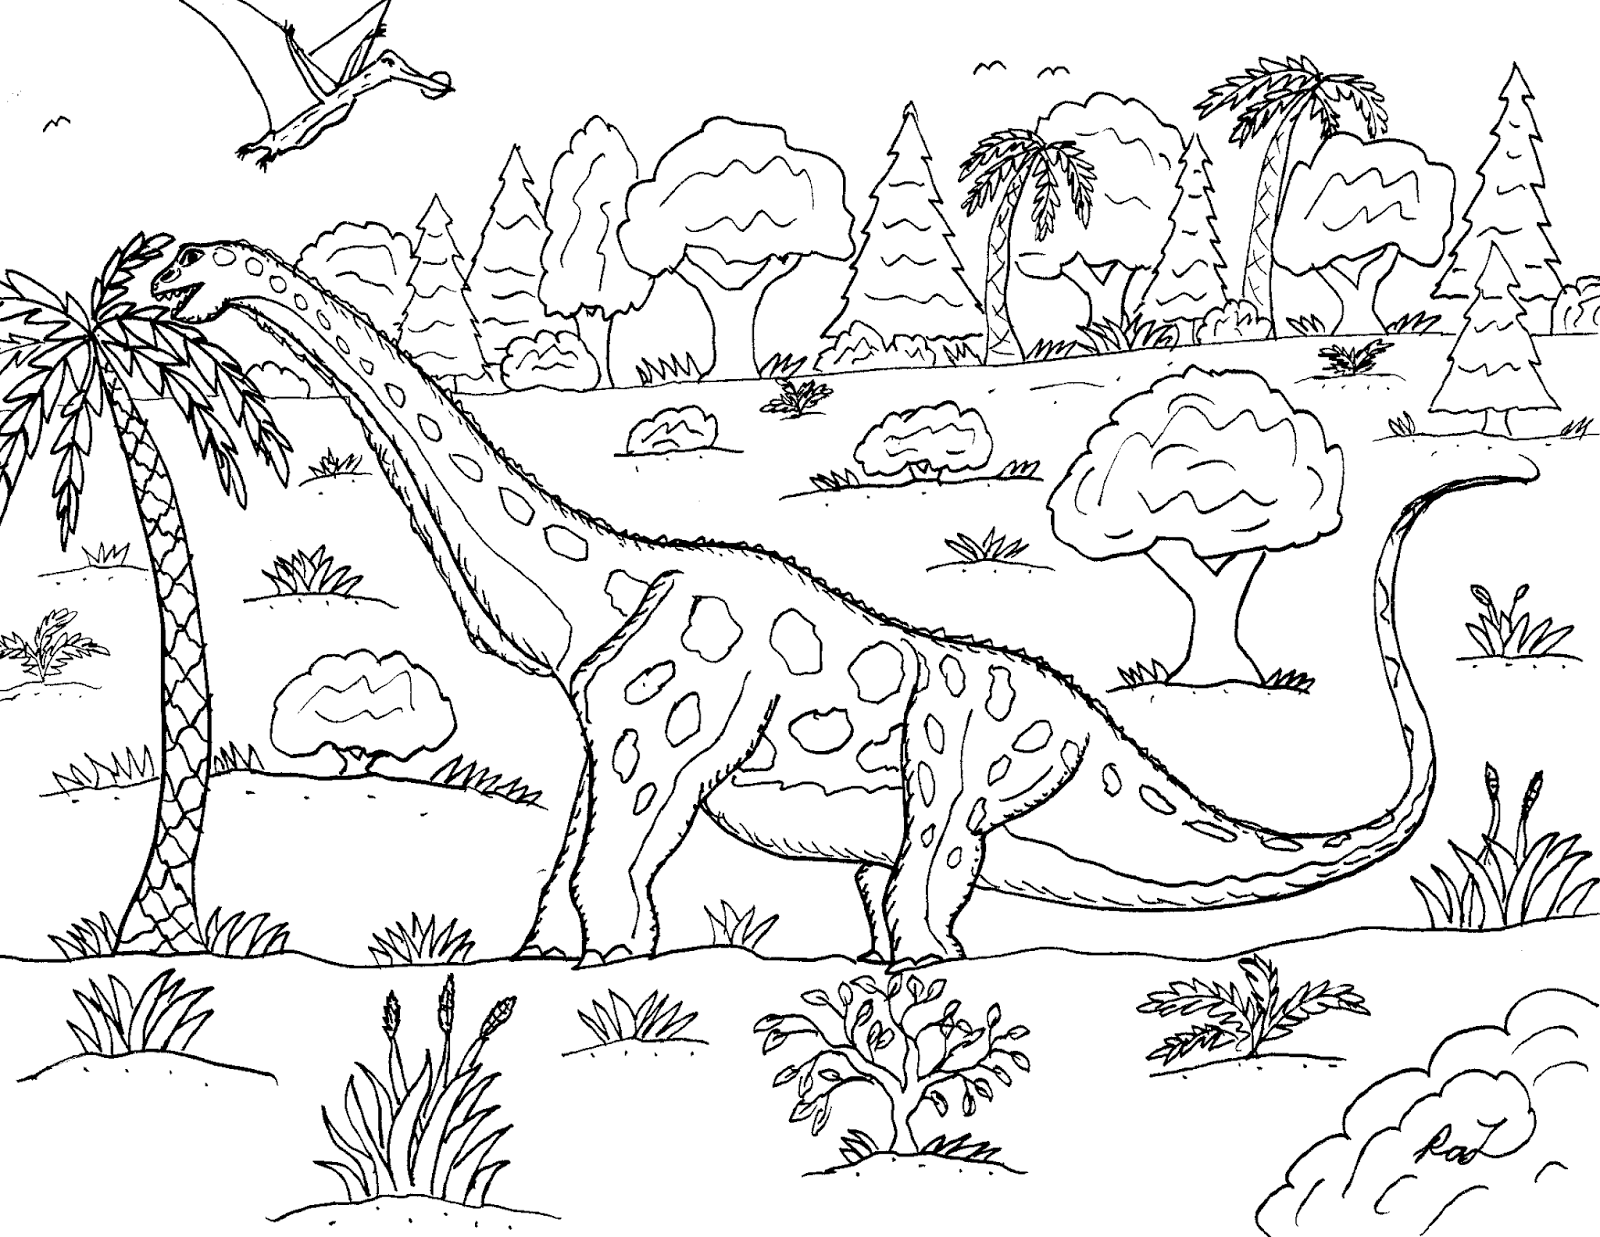 brachiosaurus coloring pages for adults